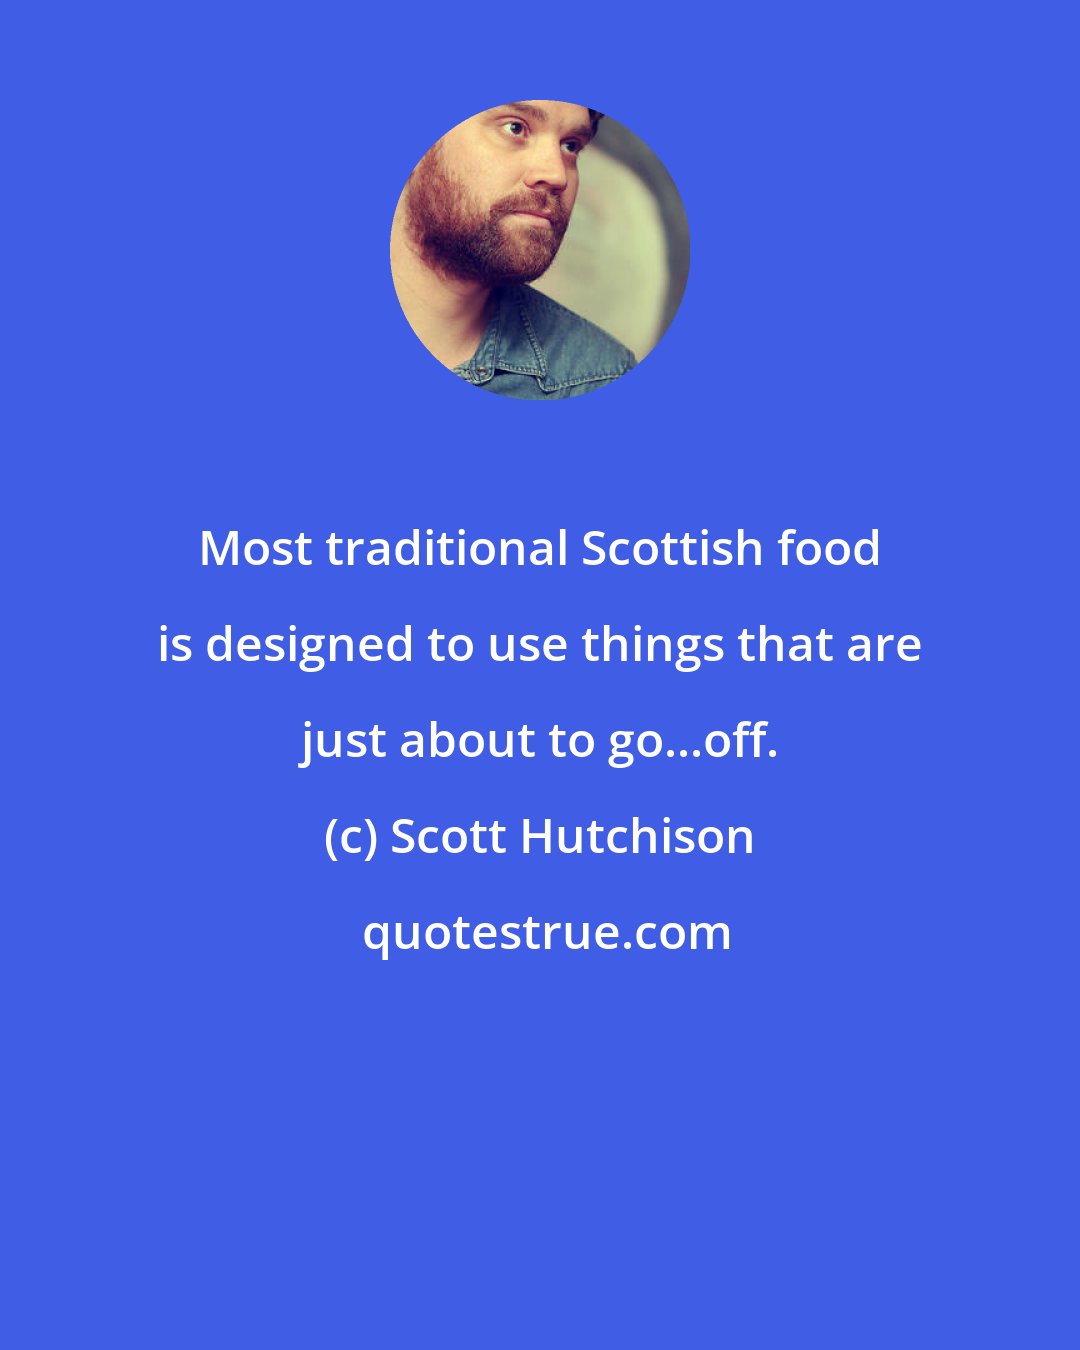 Scott Hutchison: Most traditional Scottish food is designed to use things that are just about to go...off.